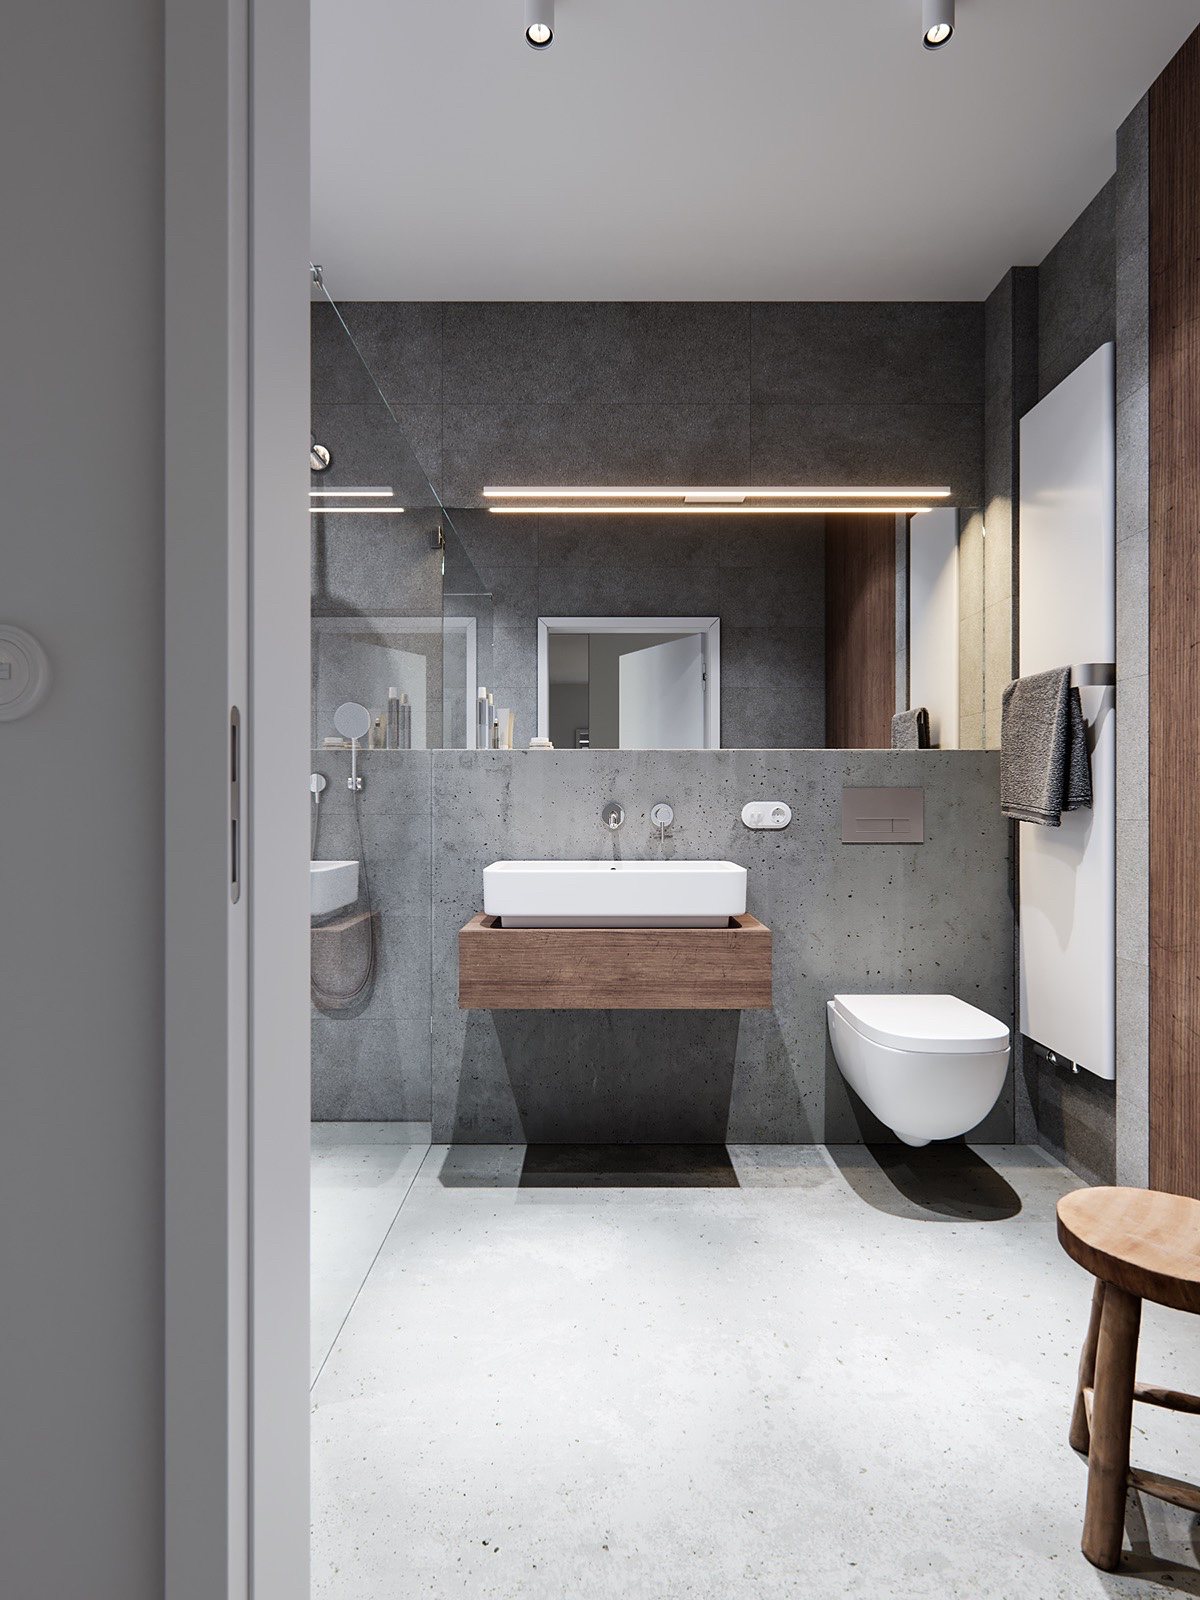 Concrete-and-wood bathroom design "width =" 1200 "height =" 1600 "srcset =" https://mileray.com/wp-content/uploads/2017/04/concrete-and-wood-bathroom-design -Dmytro-Mesaksudi.jpg 1200w, https://mileray.com/wp-content/uploads/2017/04/concrete-and-wood-bathroom-design-Dmytro-Mesaksudi-225x300.jpg 225w, https: // myfashionos .com / wp-content / uploads / 2017/04 / Concrete-and-wood-bathroom-design-Dmytro-Mesaksudi-768x1024.jpg 768w, https://mileray.com/wp-content/uploads/2017/04/ Concrete-and-wood-bathroom-design-Dmytro-Mesaksudi-696x928.jpg 696w, https://mileray.com/wp-content/uploads/2017/04/concrete-and-wood-bathroom-design-Dmytro-Mesaksudi -1068x1424.jpg 1068w, https://mileray.com/wp-content/uploads/2017/04/concrete-and-wood-bathroom-design-Dmytro-Mesaksudi-315x420.jpg 315w "size =" (max-width : 1200px) 100vw, 1200px